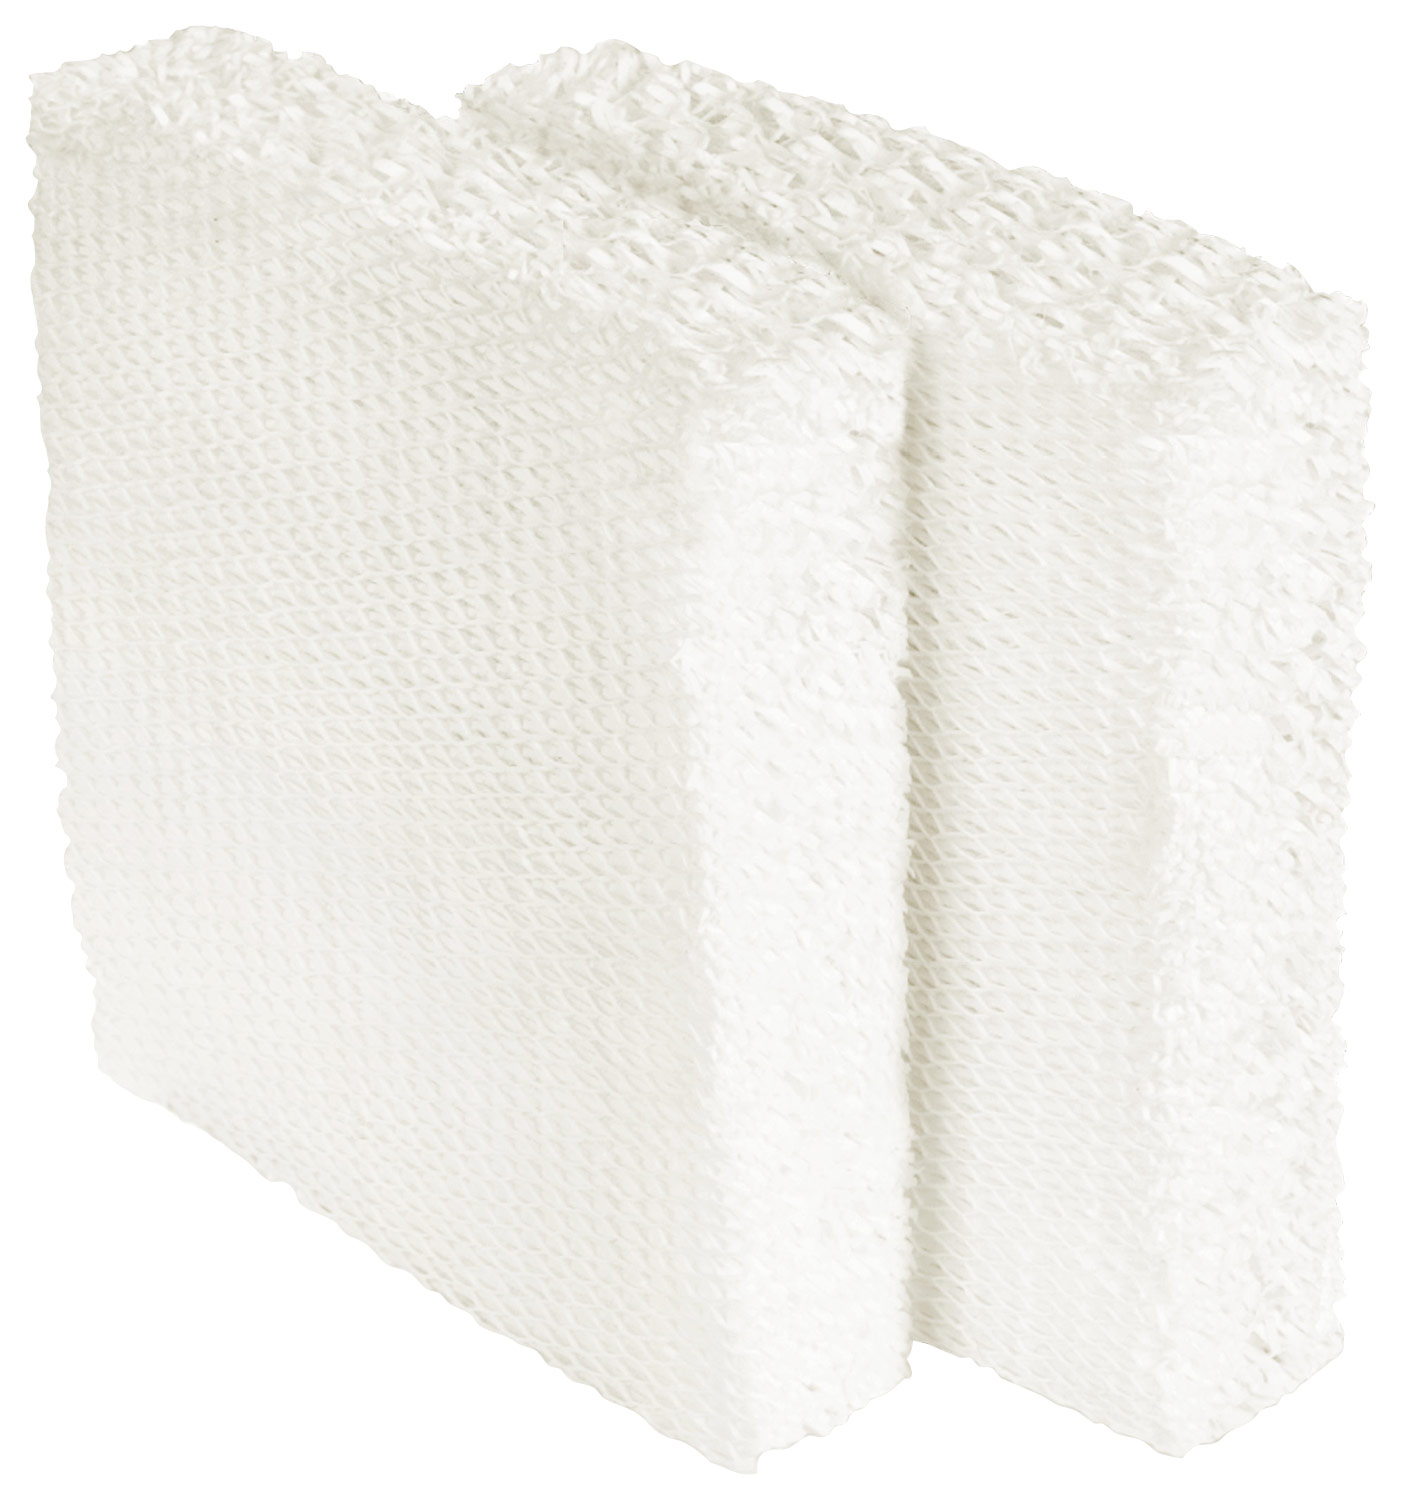 Wick Filters for Vornadobaby Huey Evaporative Humidifiers (2-Pack)